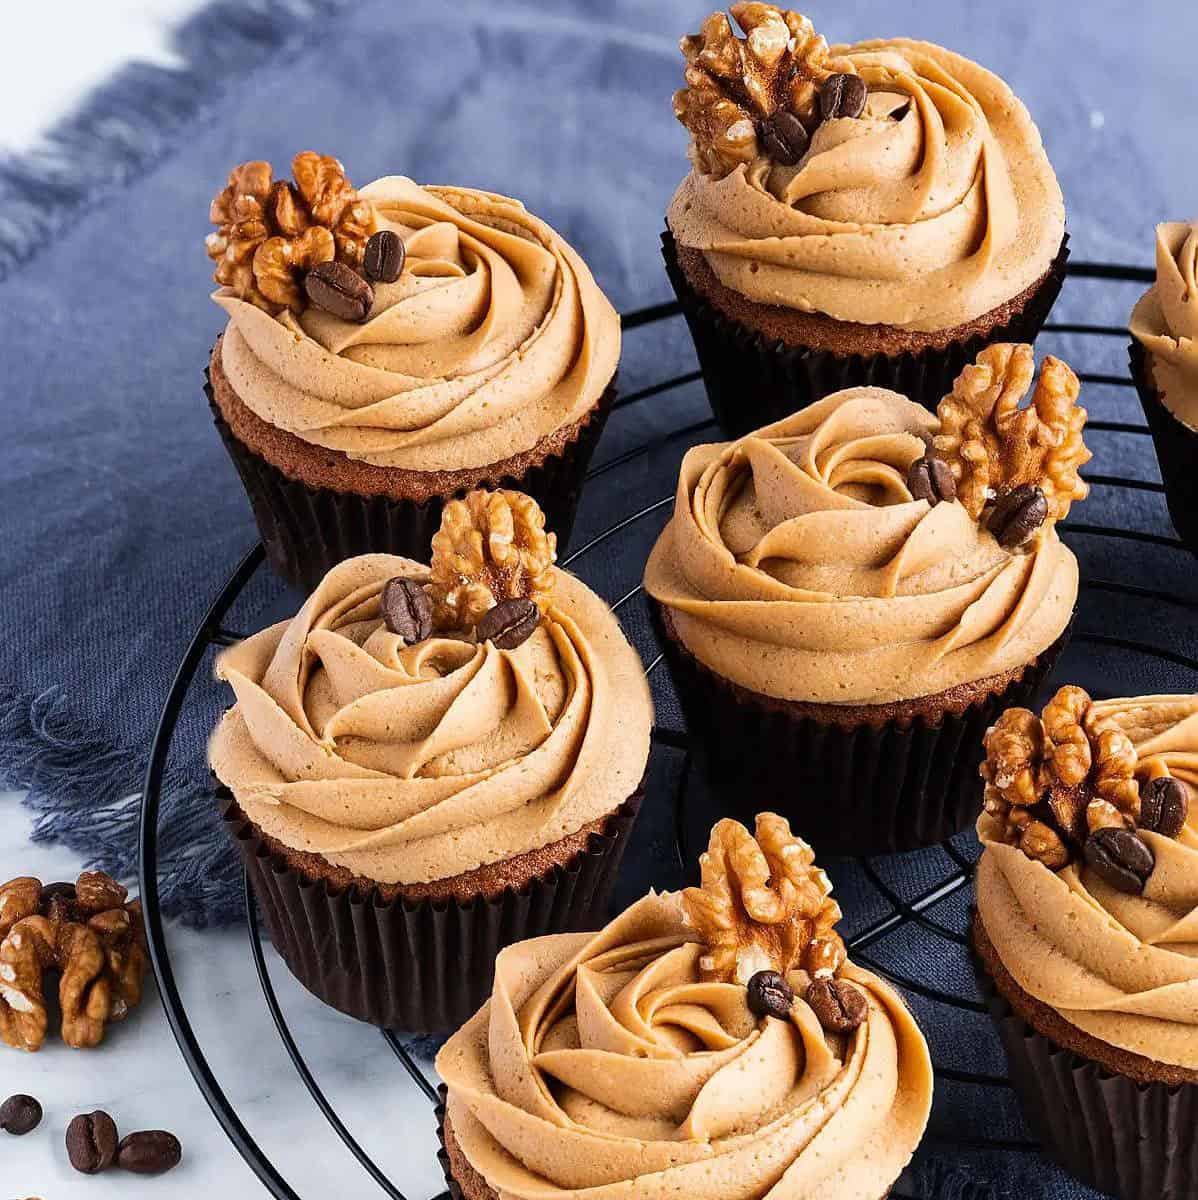  Don't forget to top them off with a dollop of fluffy frosting for an indulgent touch.